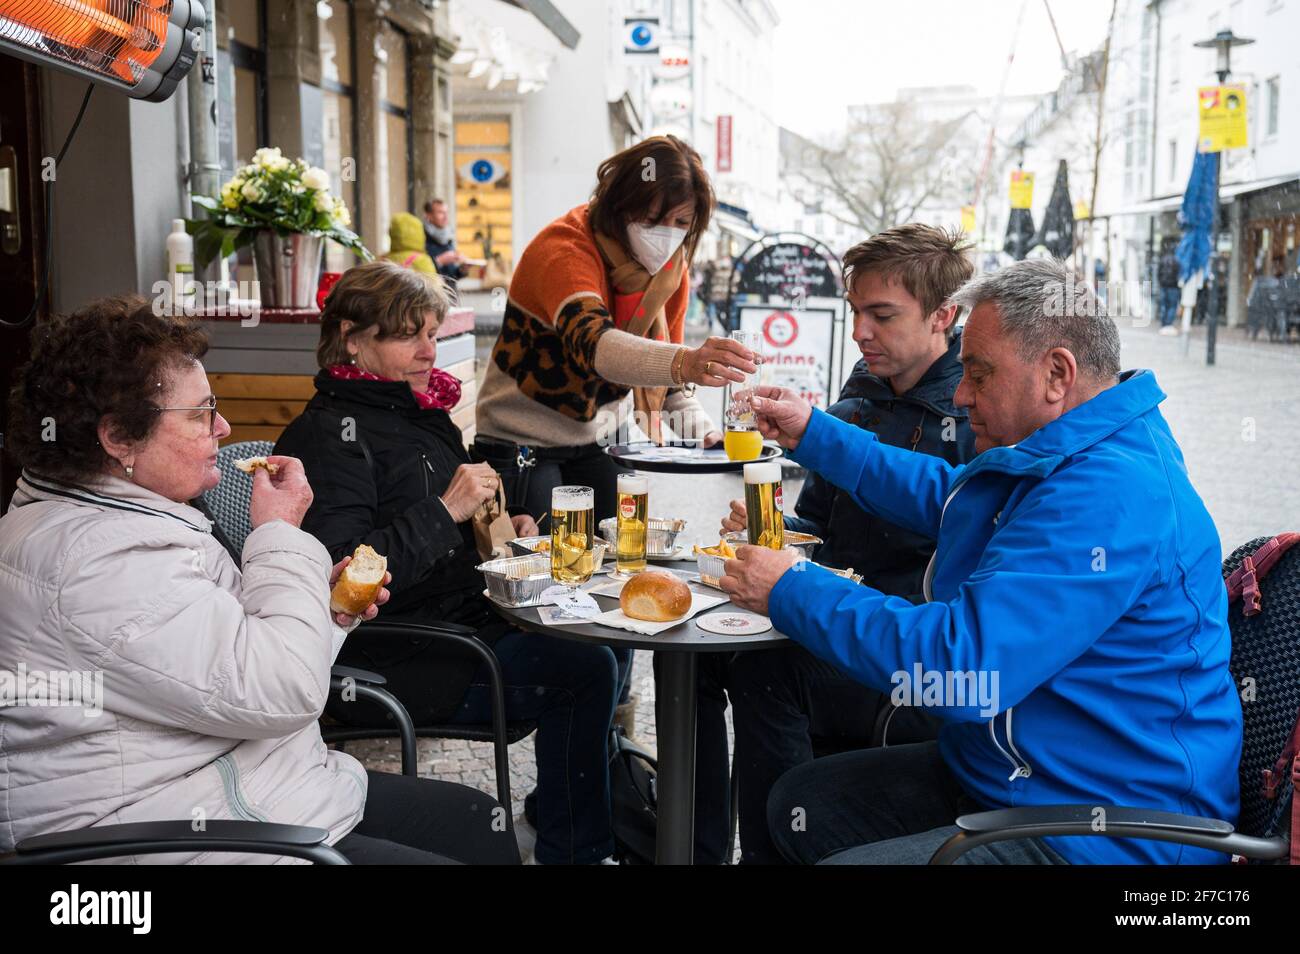 06 April 2021, Saarland, Saarbrücken: Landlady Monika Müller (m) brings drinks to her guests sitting in front of her pub 'Glühwürmchen' in the city centre. Since 06.04.2021, restaurateurs have been allowed to reopen their outdoor restaurants under certain conditions as part of the Saarland Model. Photo: Oliver Dietze/dpa Stock Photo